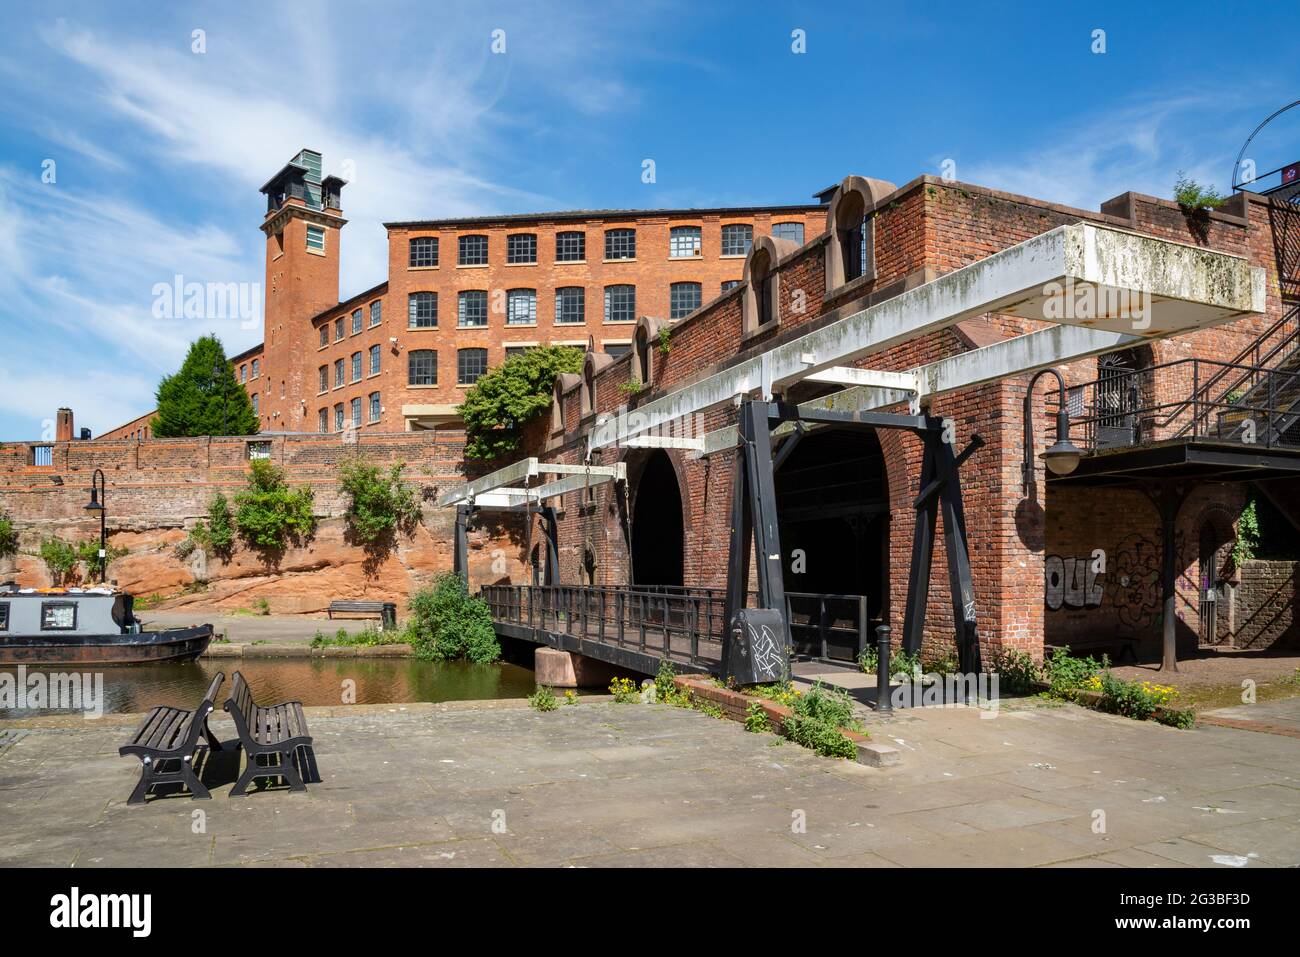 Grocers Warehouse, Castlefield, Manchester. A historic site in this urban heritage park around the Bridgewater and Rochdale canals. Stock Photo